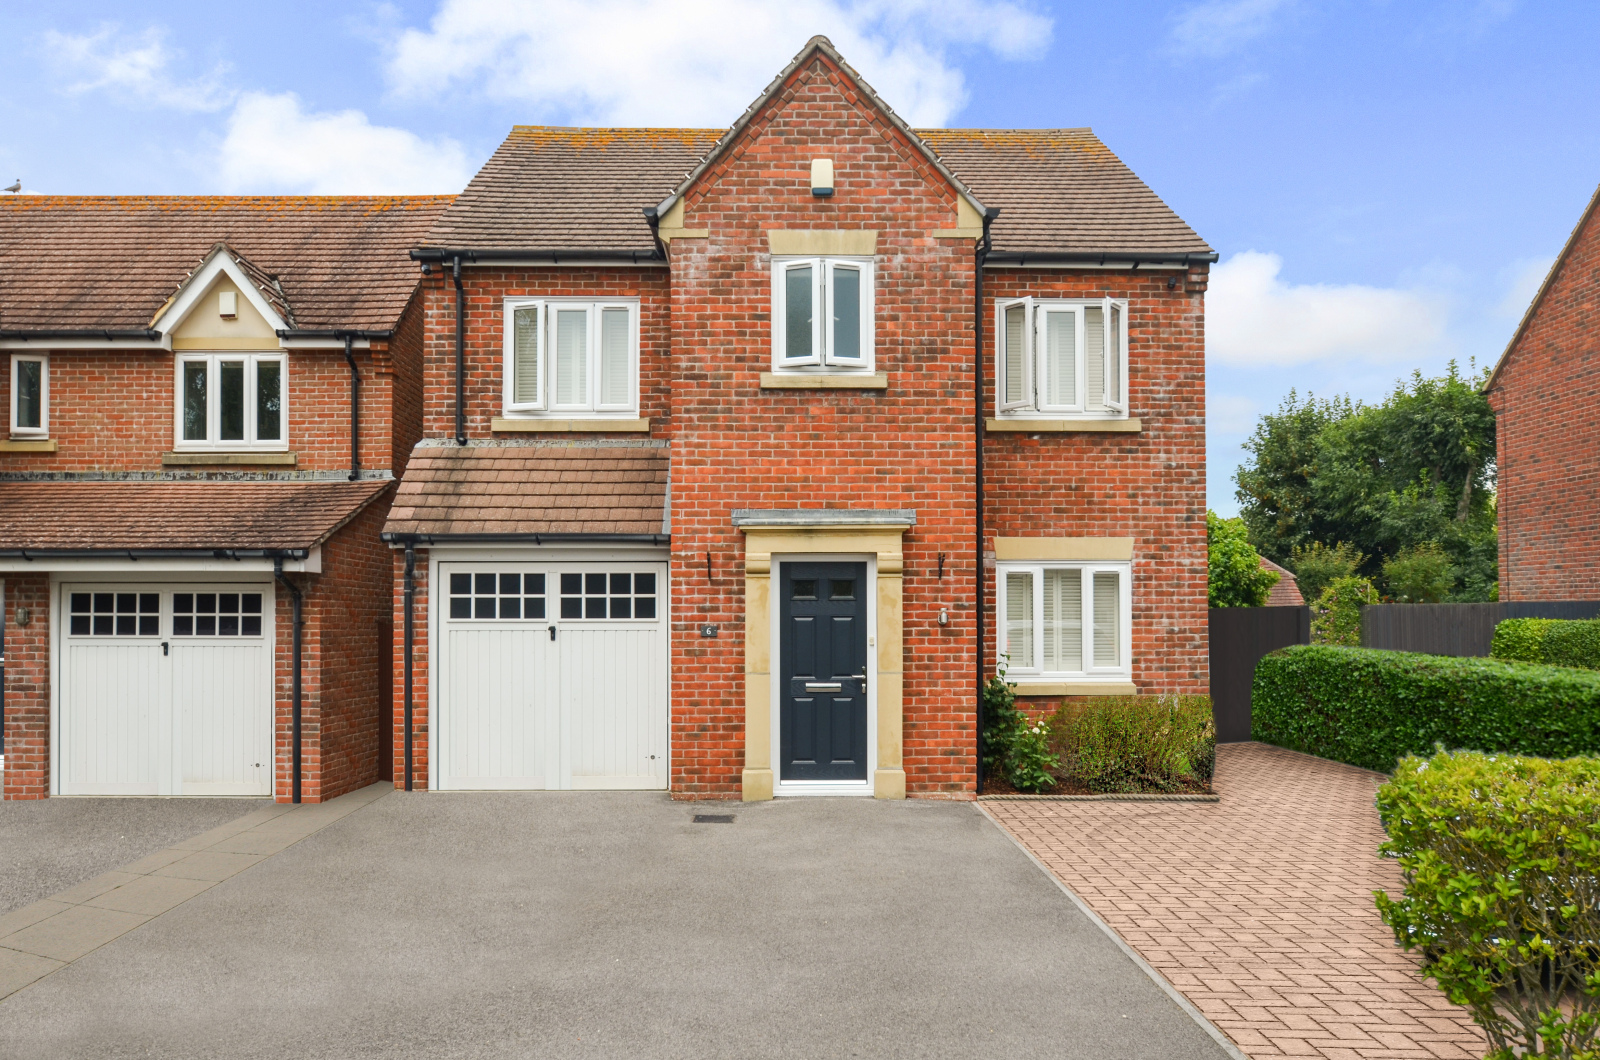 4 bed house for sale in Darlington Close, Angmering  - Property Image 1